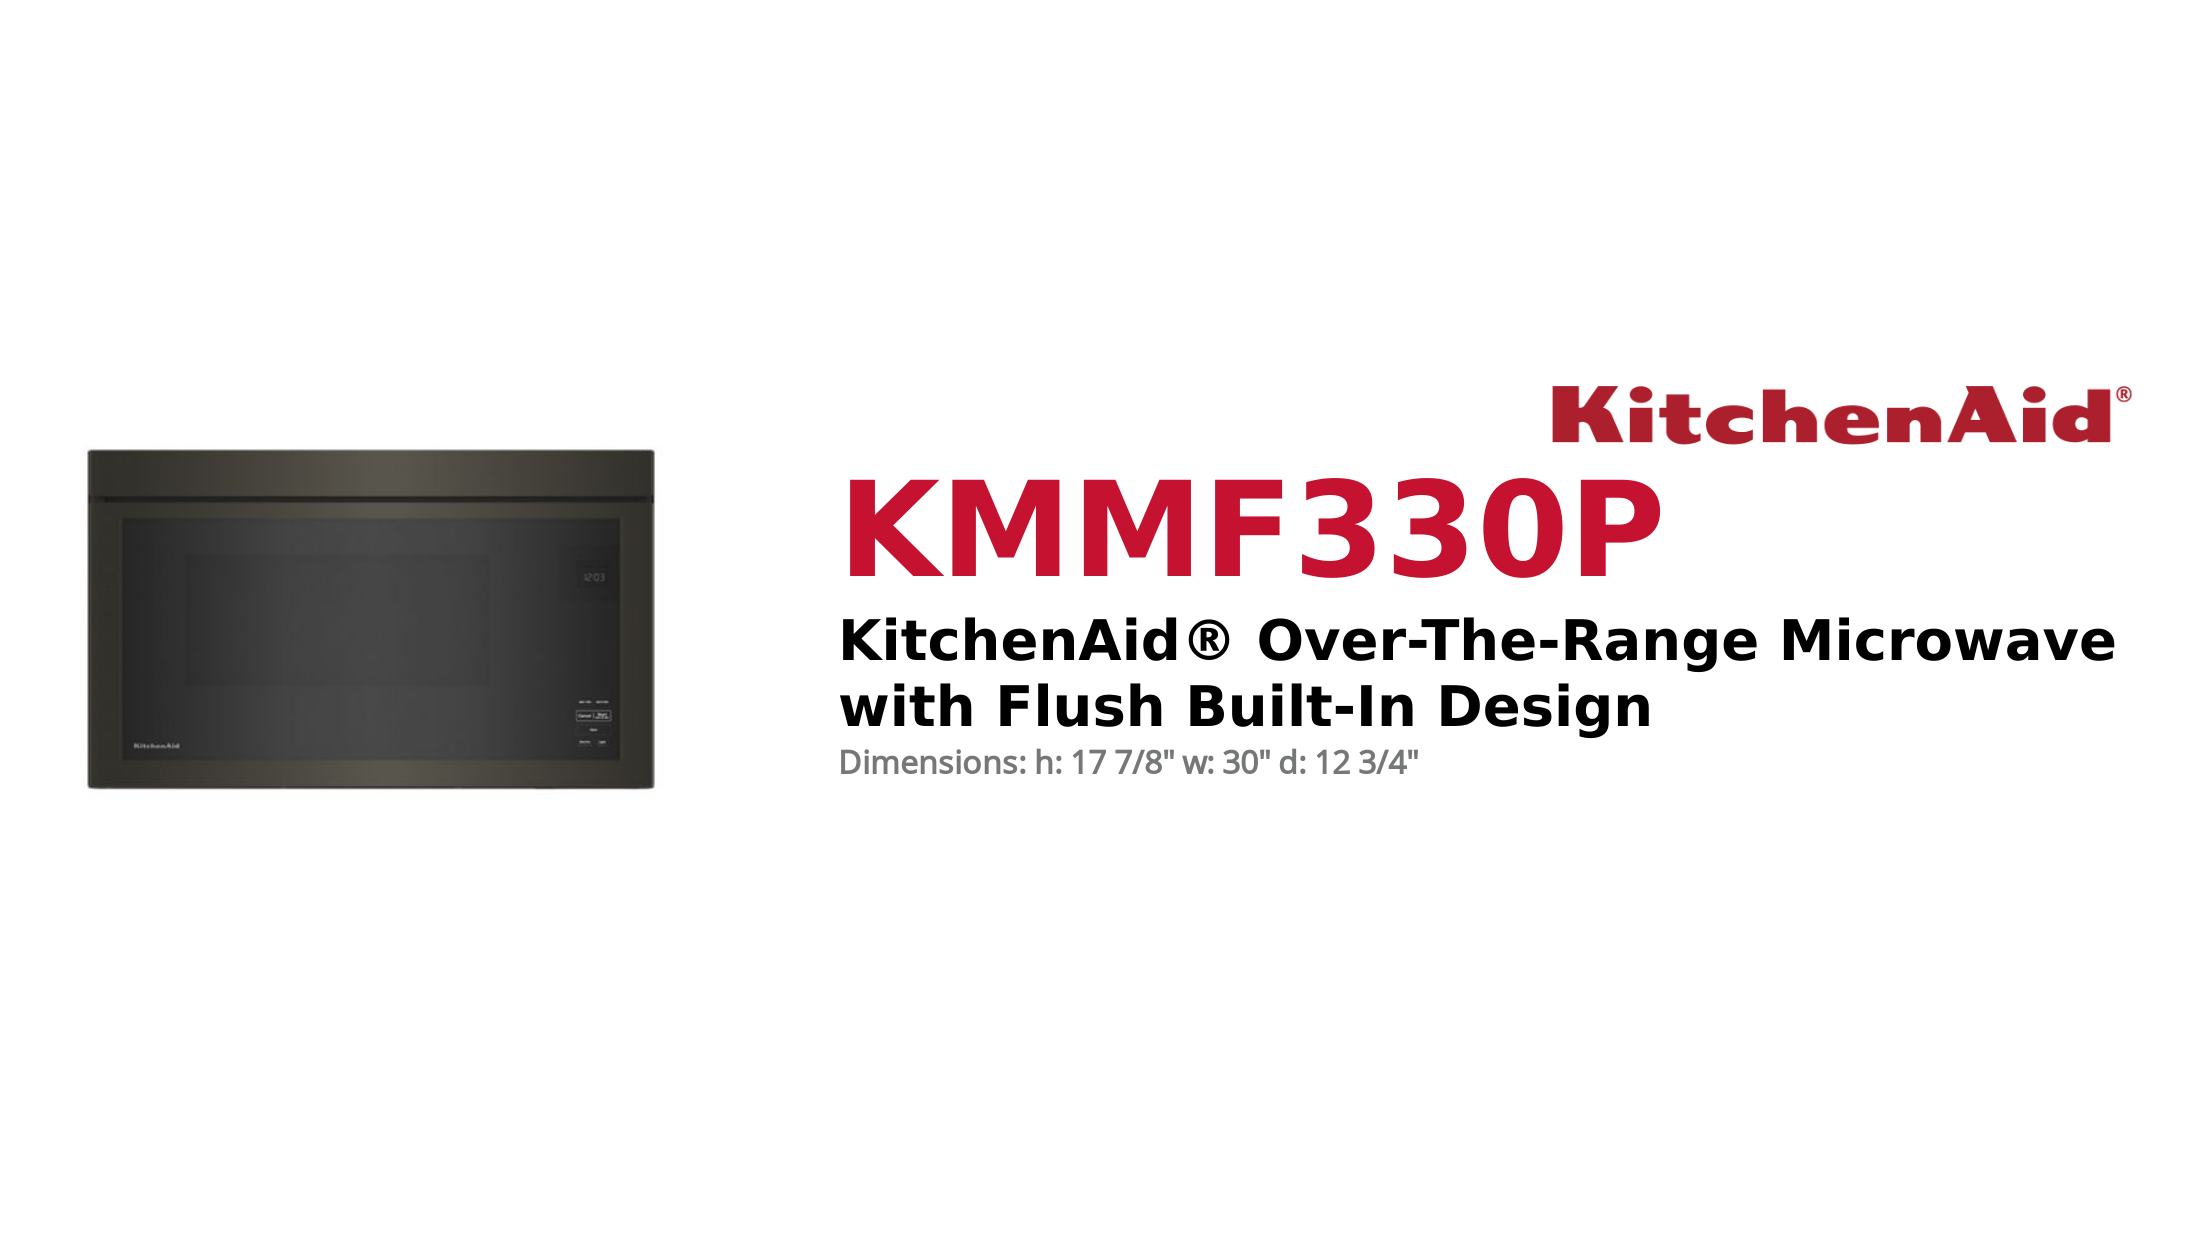 KitchenAid® Over-The-Range Microwave with Flush Built-In Design